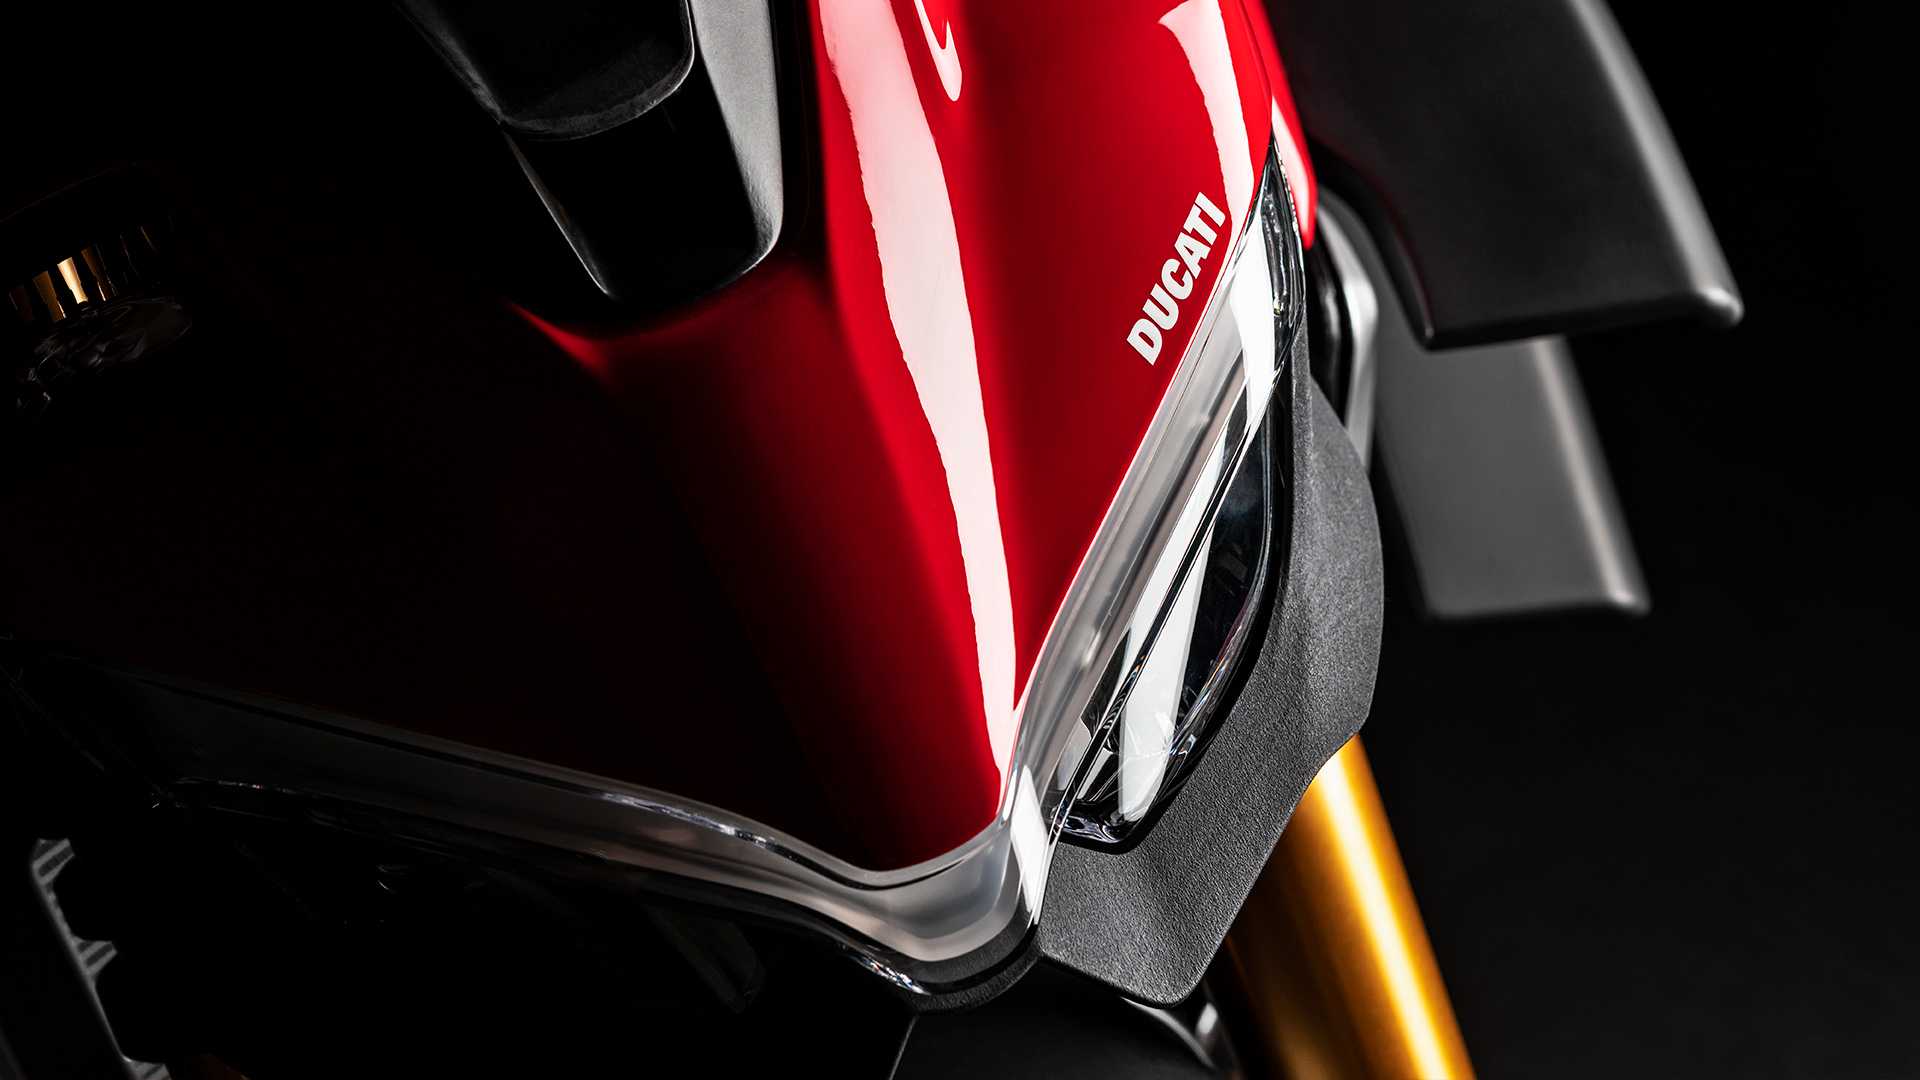 Ducati Streetfighter Wallpapers